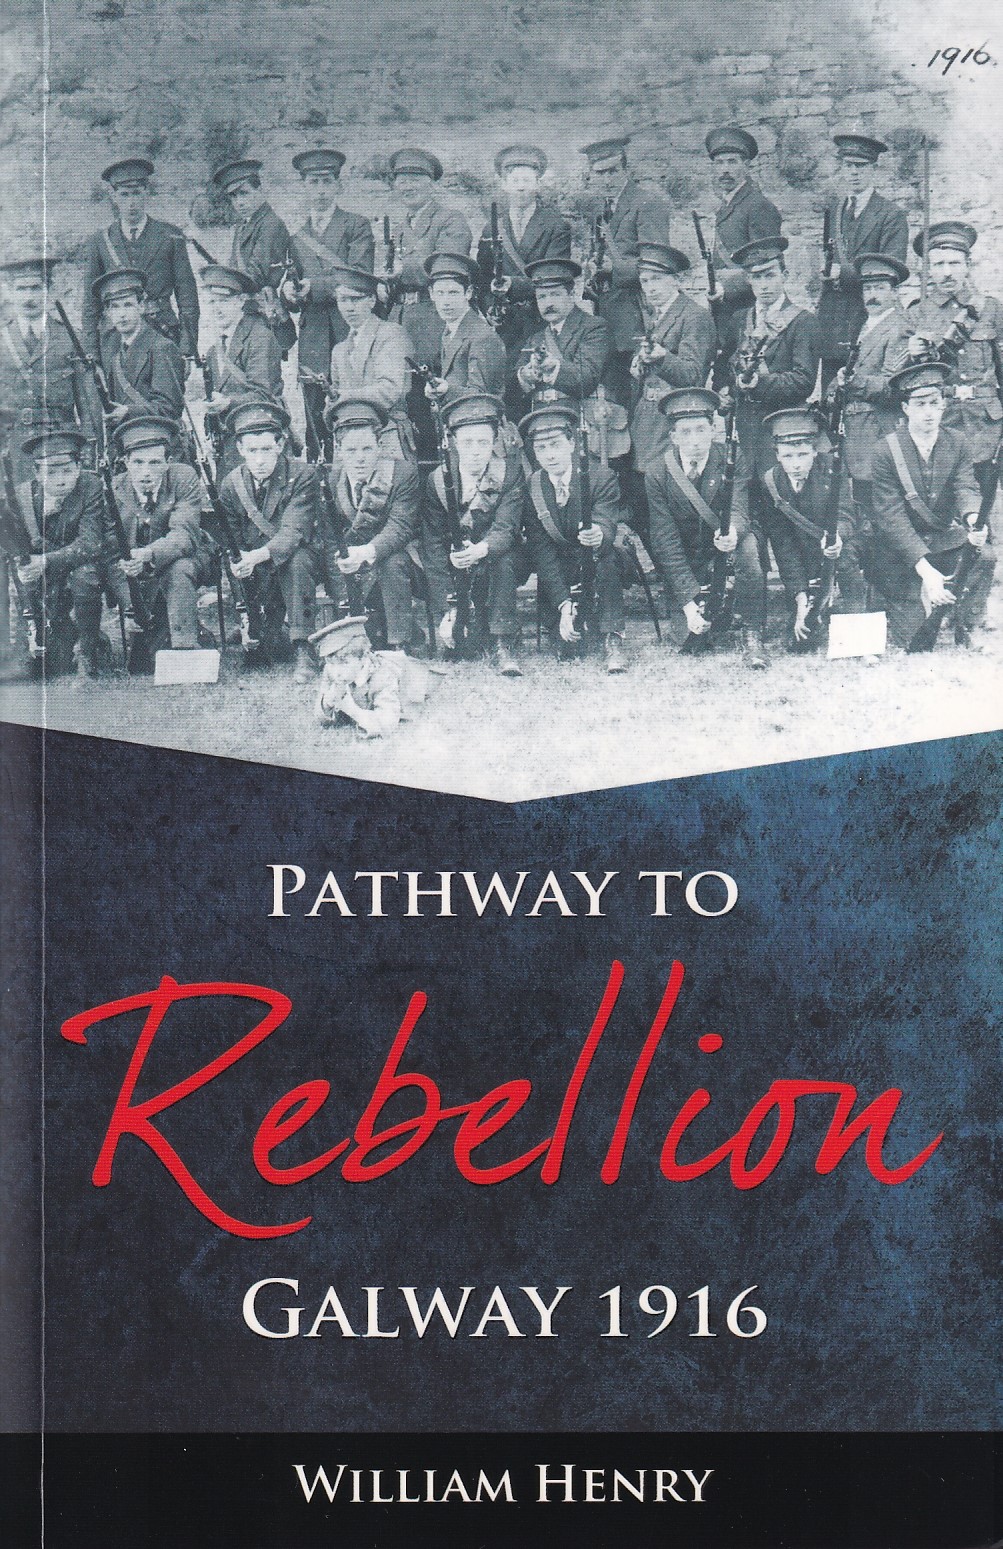 Pathway to Rebellion: Galway 1916 by William Henry